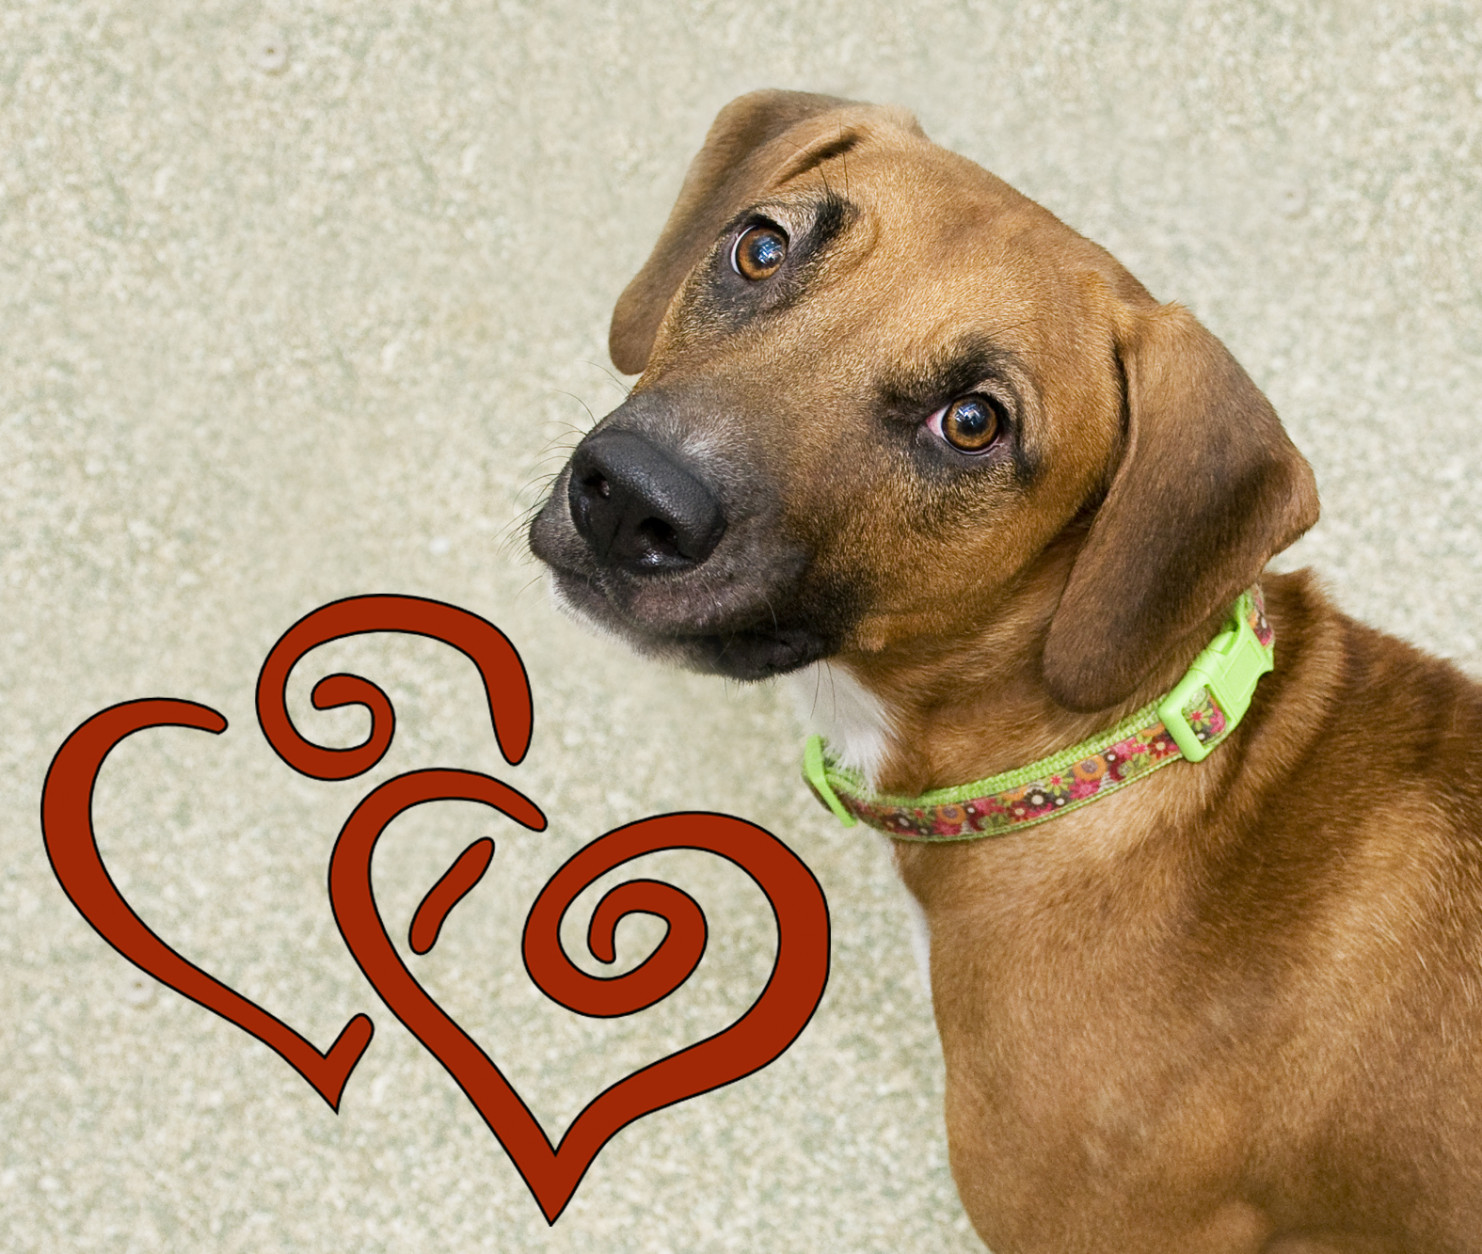 Queen of Hearts is available for adoption at the Washington Animal Rescue League. (Courtesy WARL) 